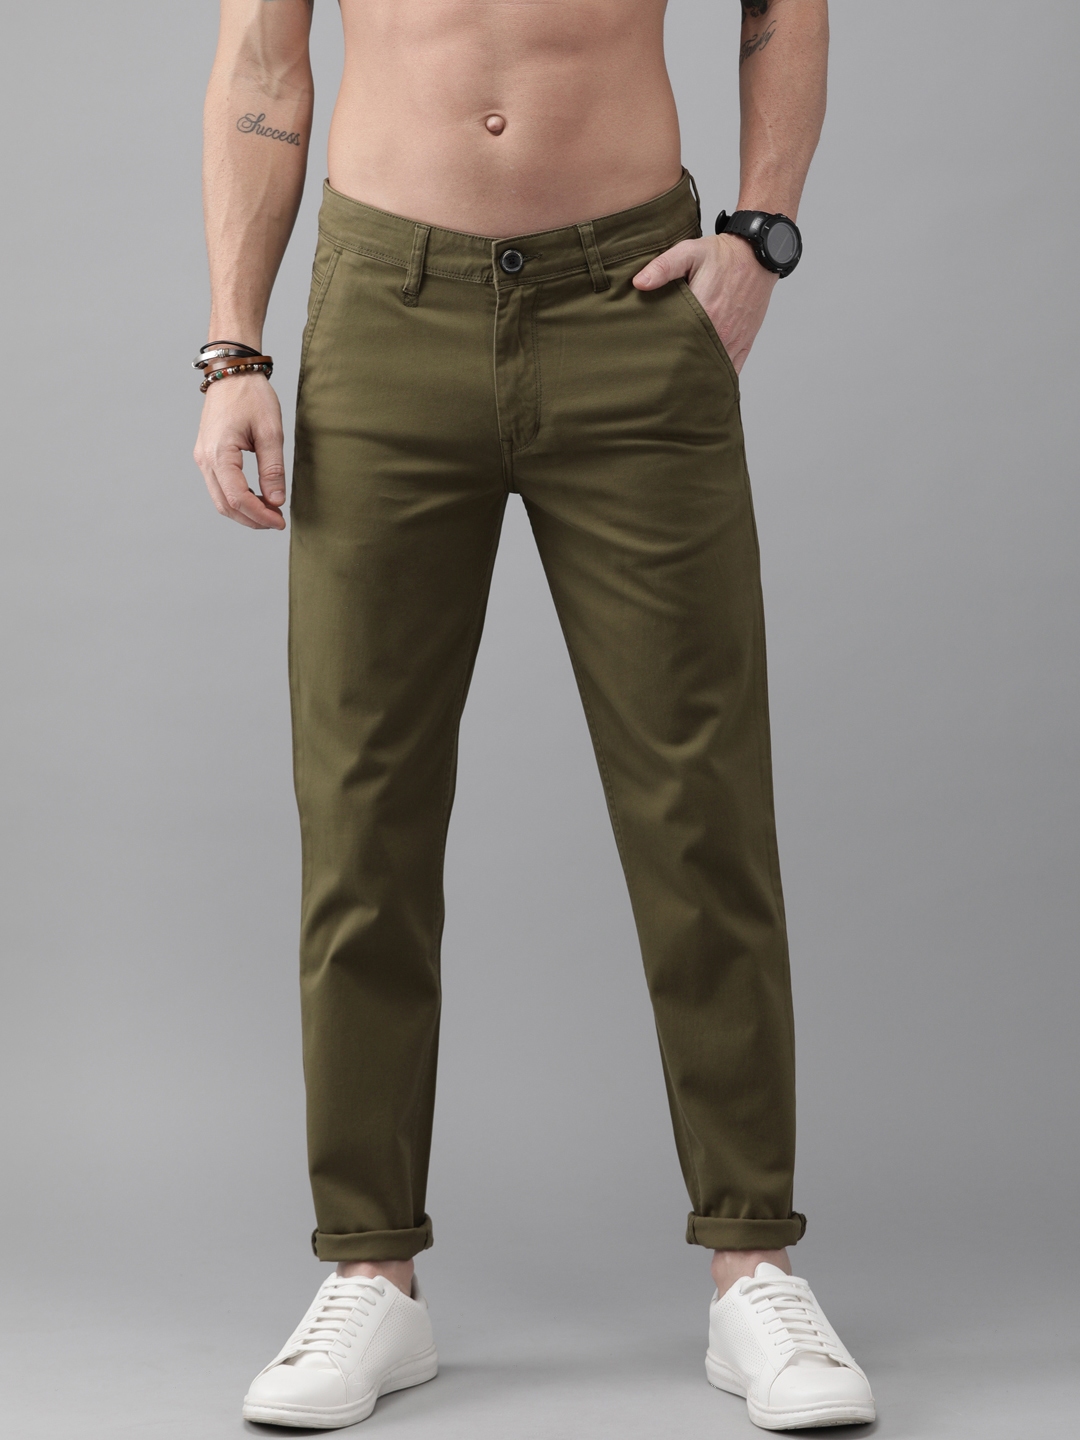 Buy The Roadster Lifestyle Co Men Olive Green Regular Fit Solid Chinos ...